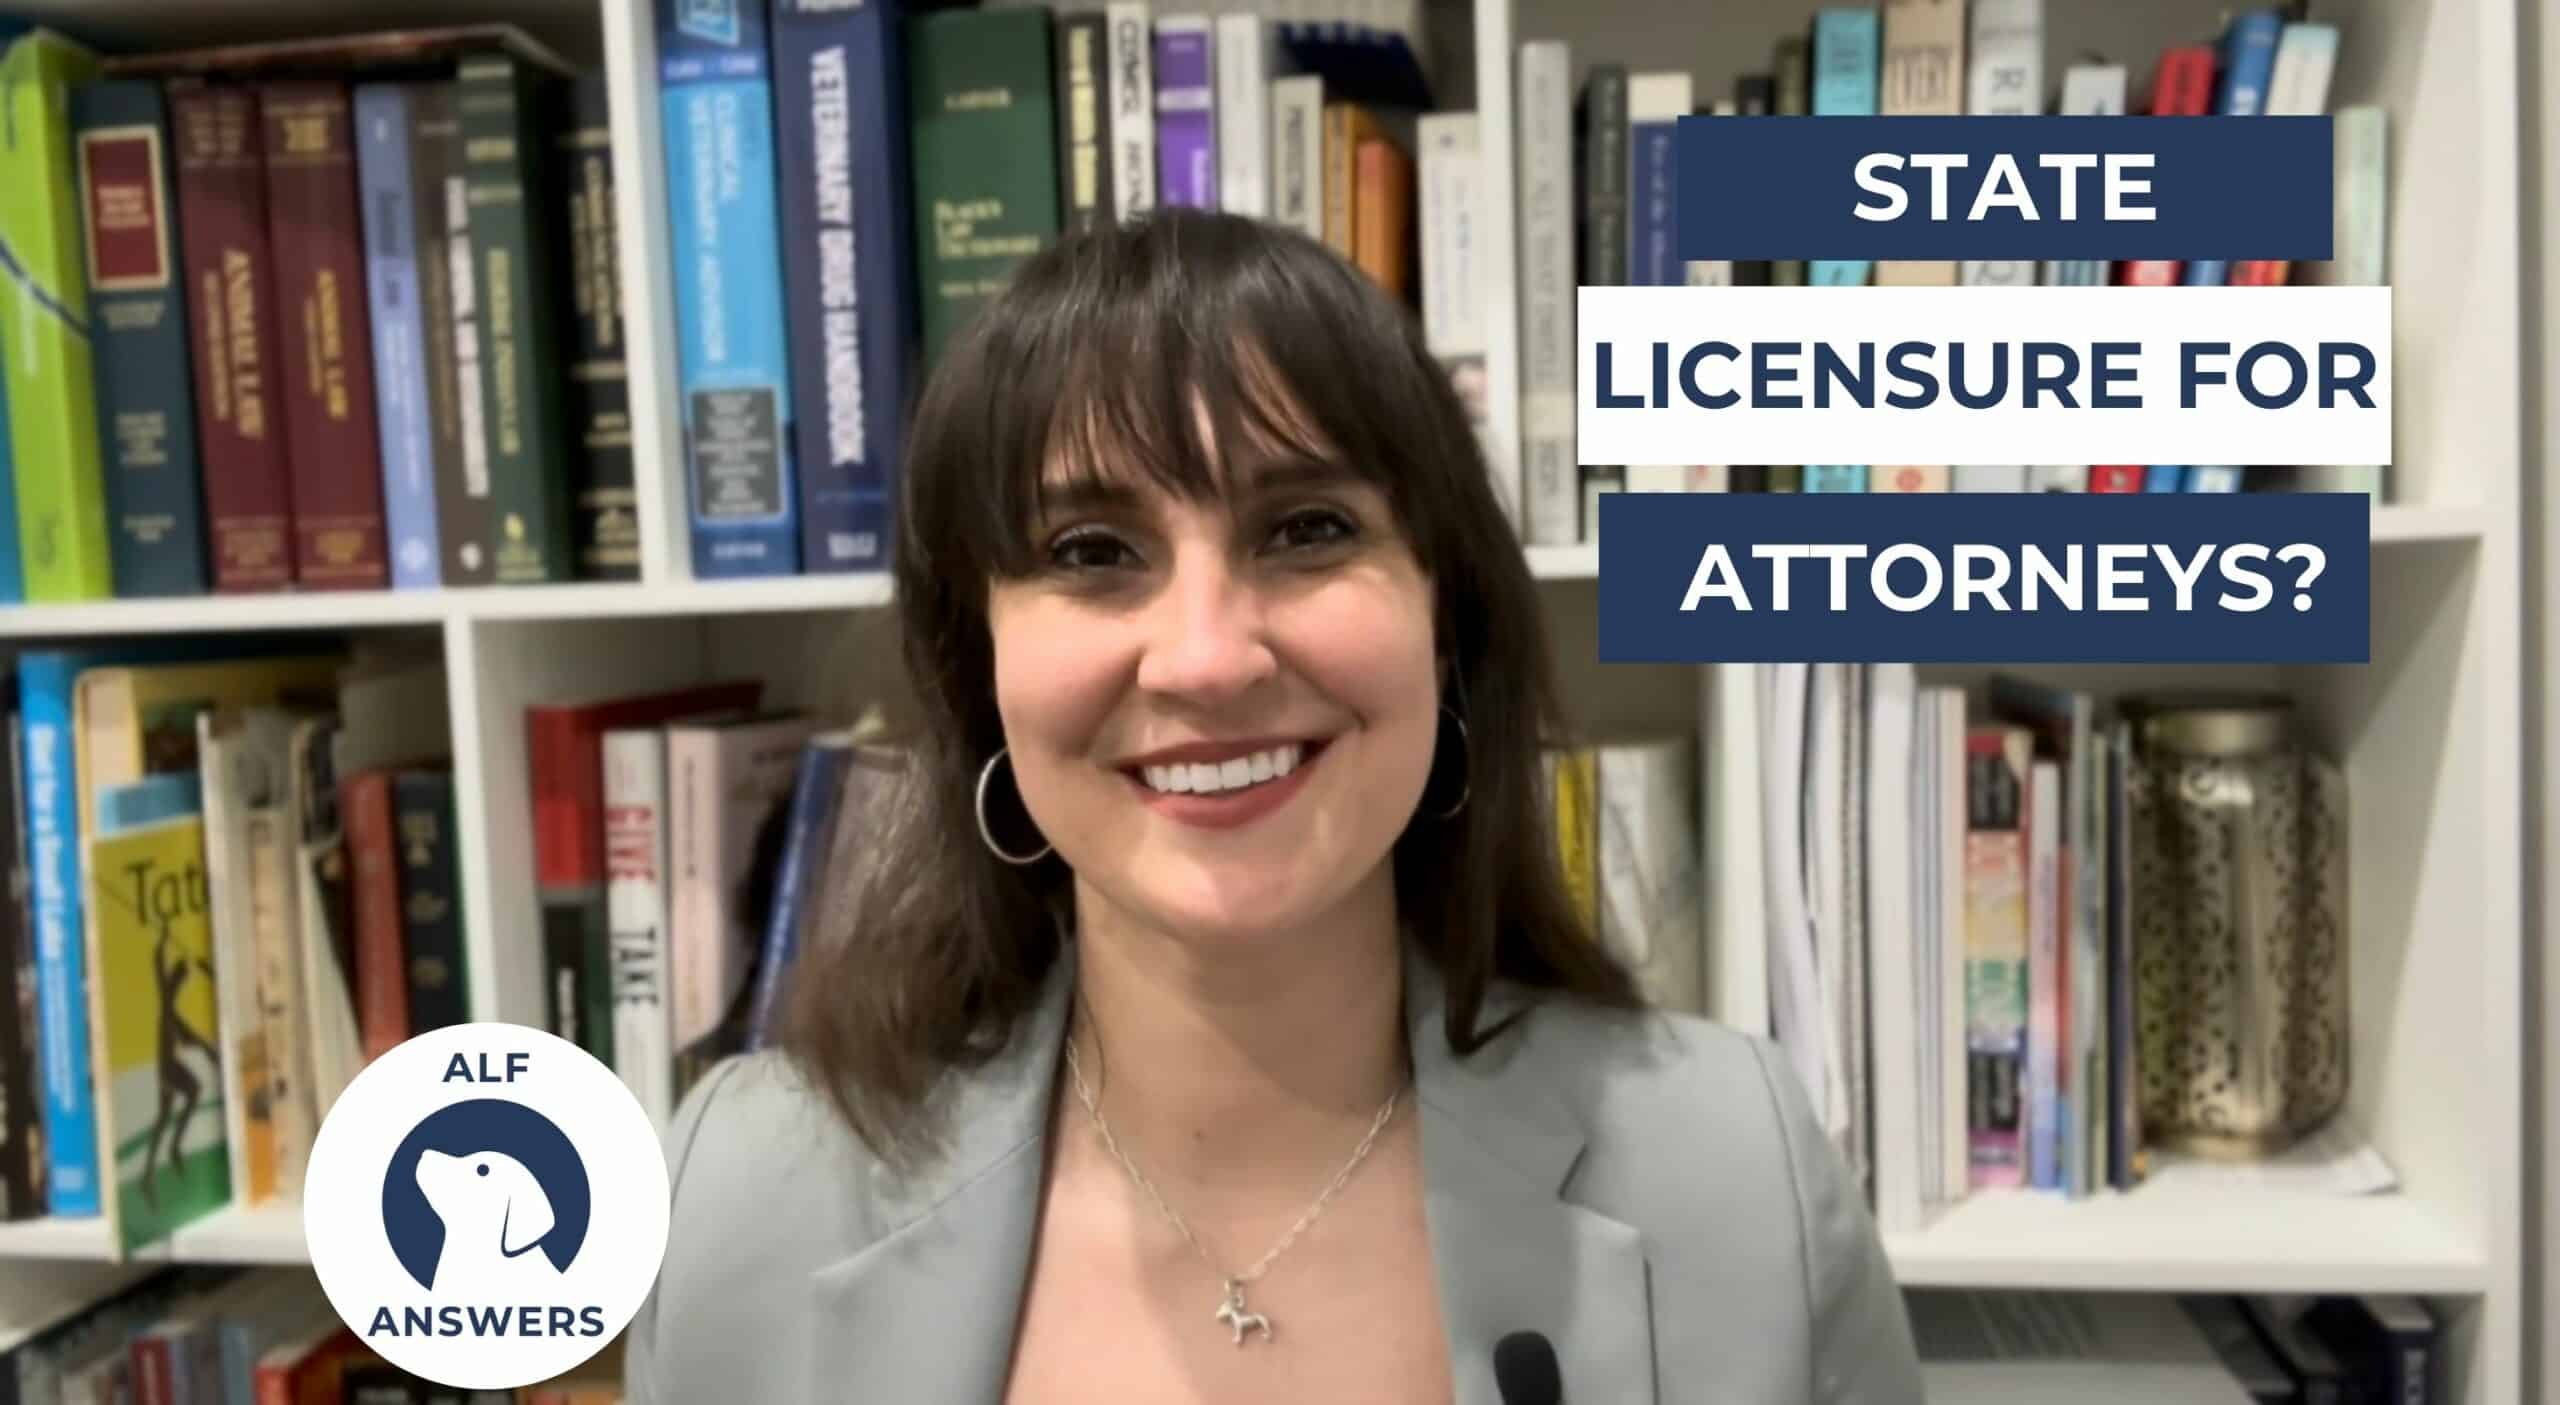 ALF Answers: “State Licensure for Attorneys?”